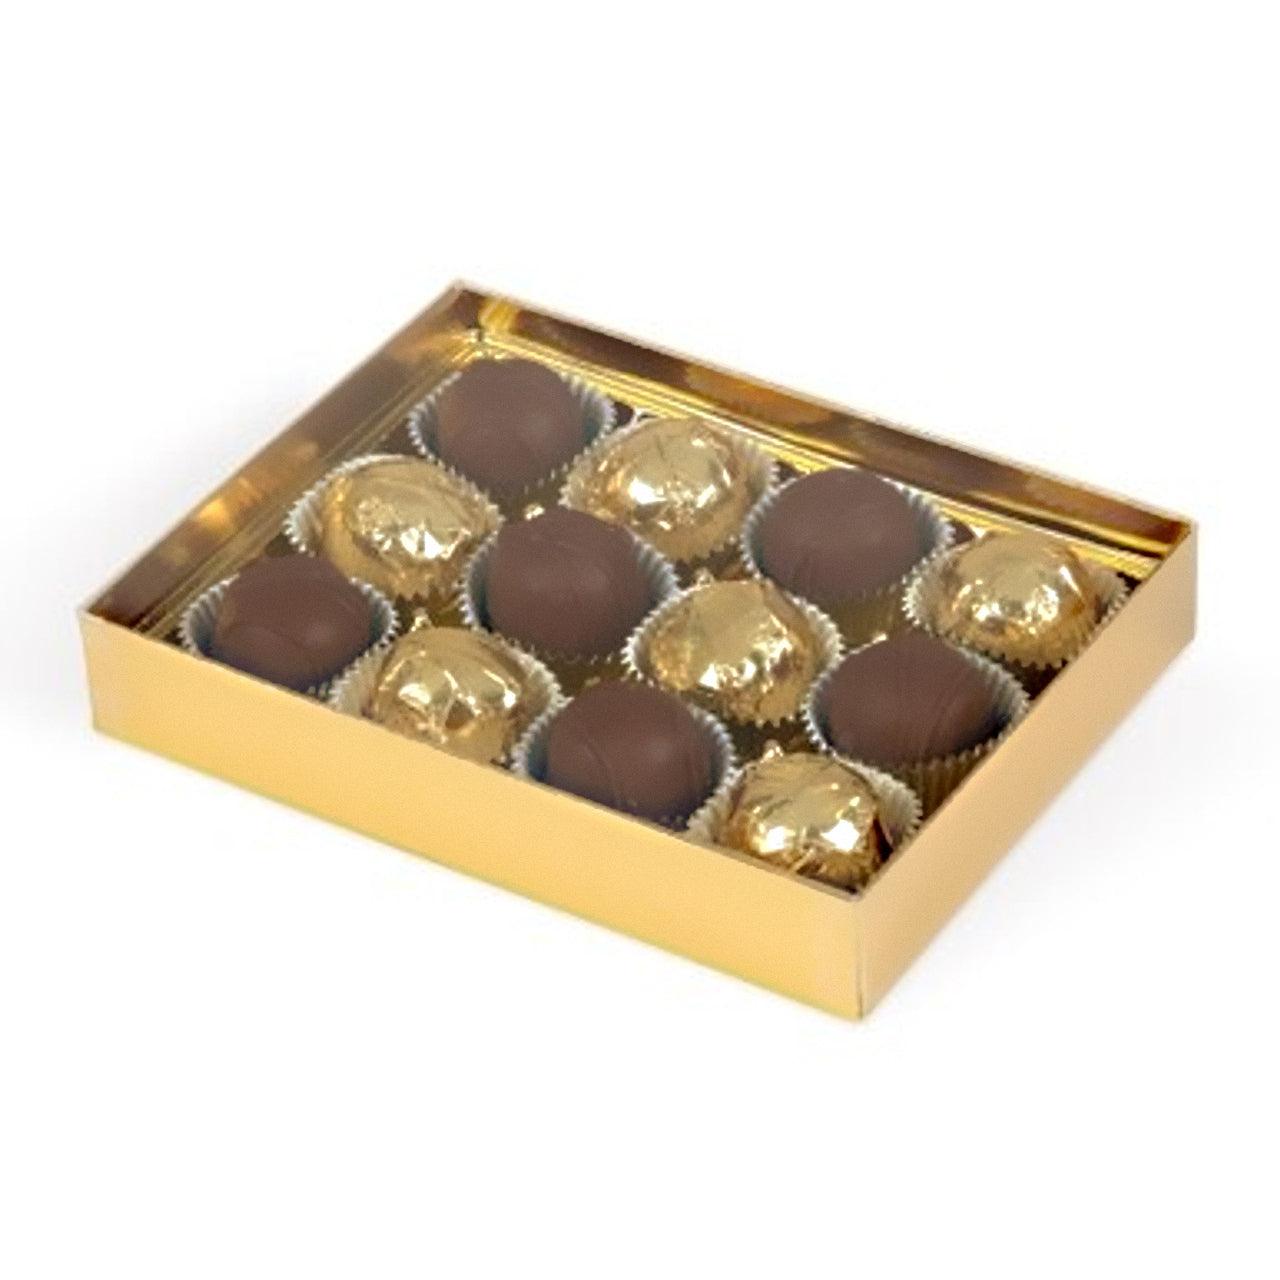 Large Single Layer Gold Box for 12 Candies - ViaCheff.com